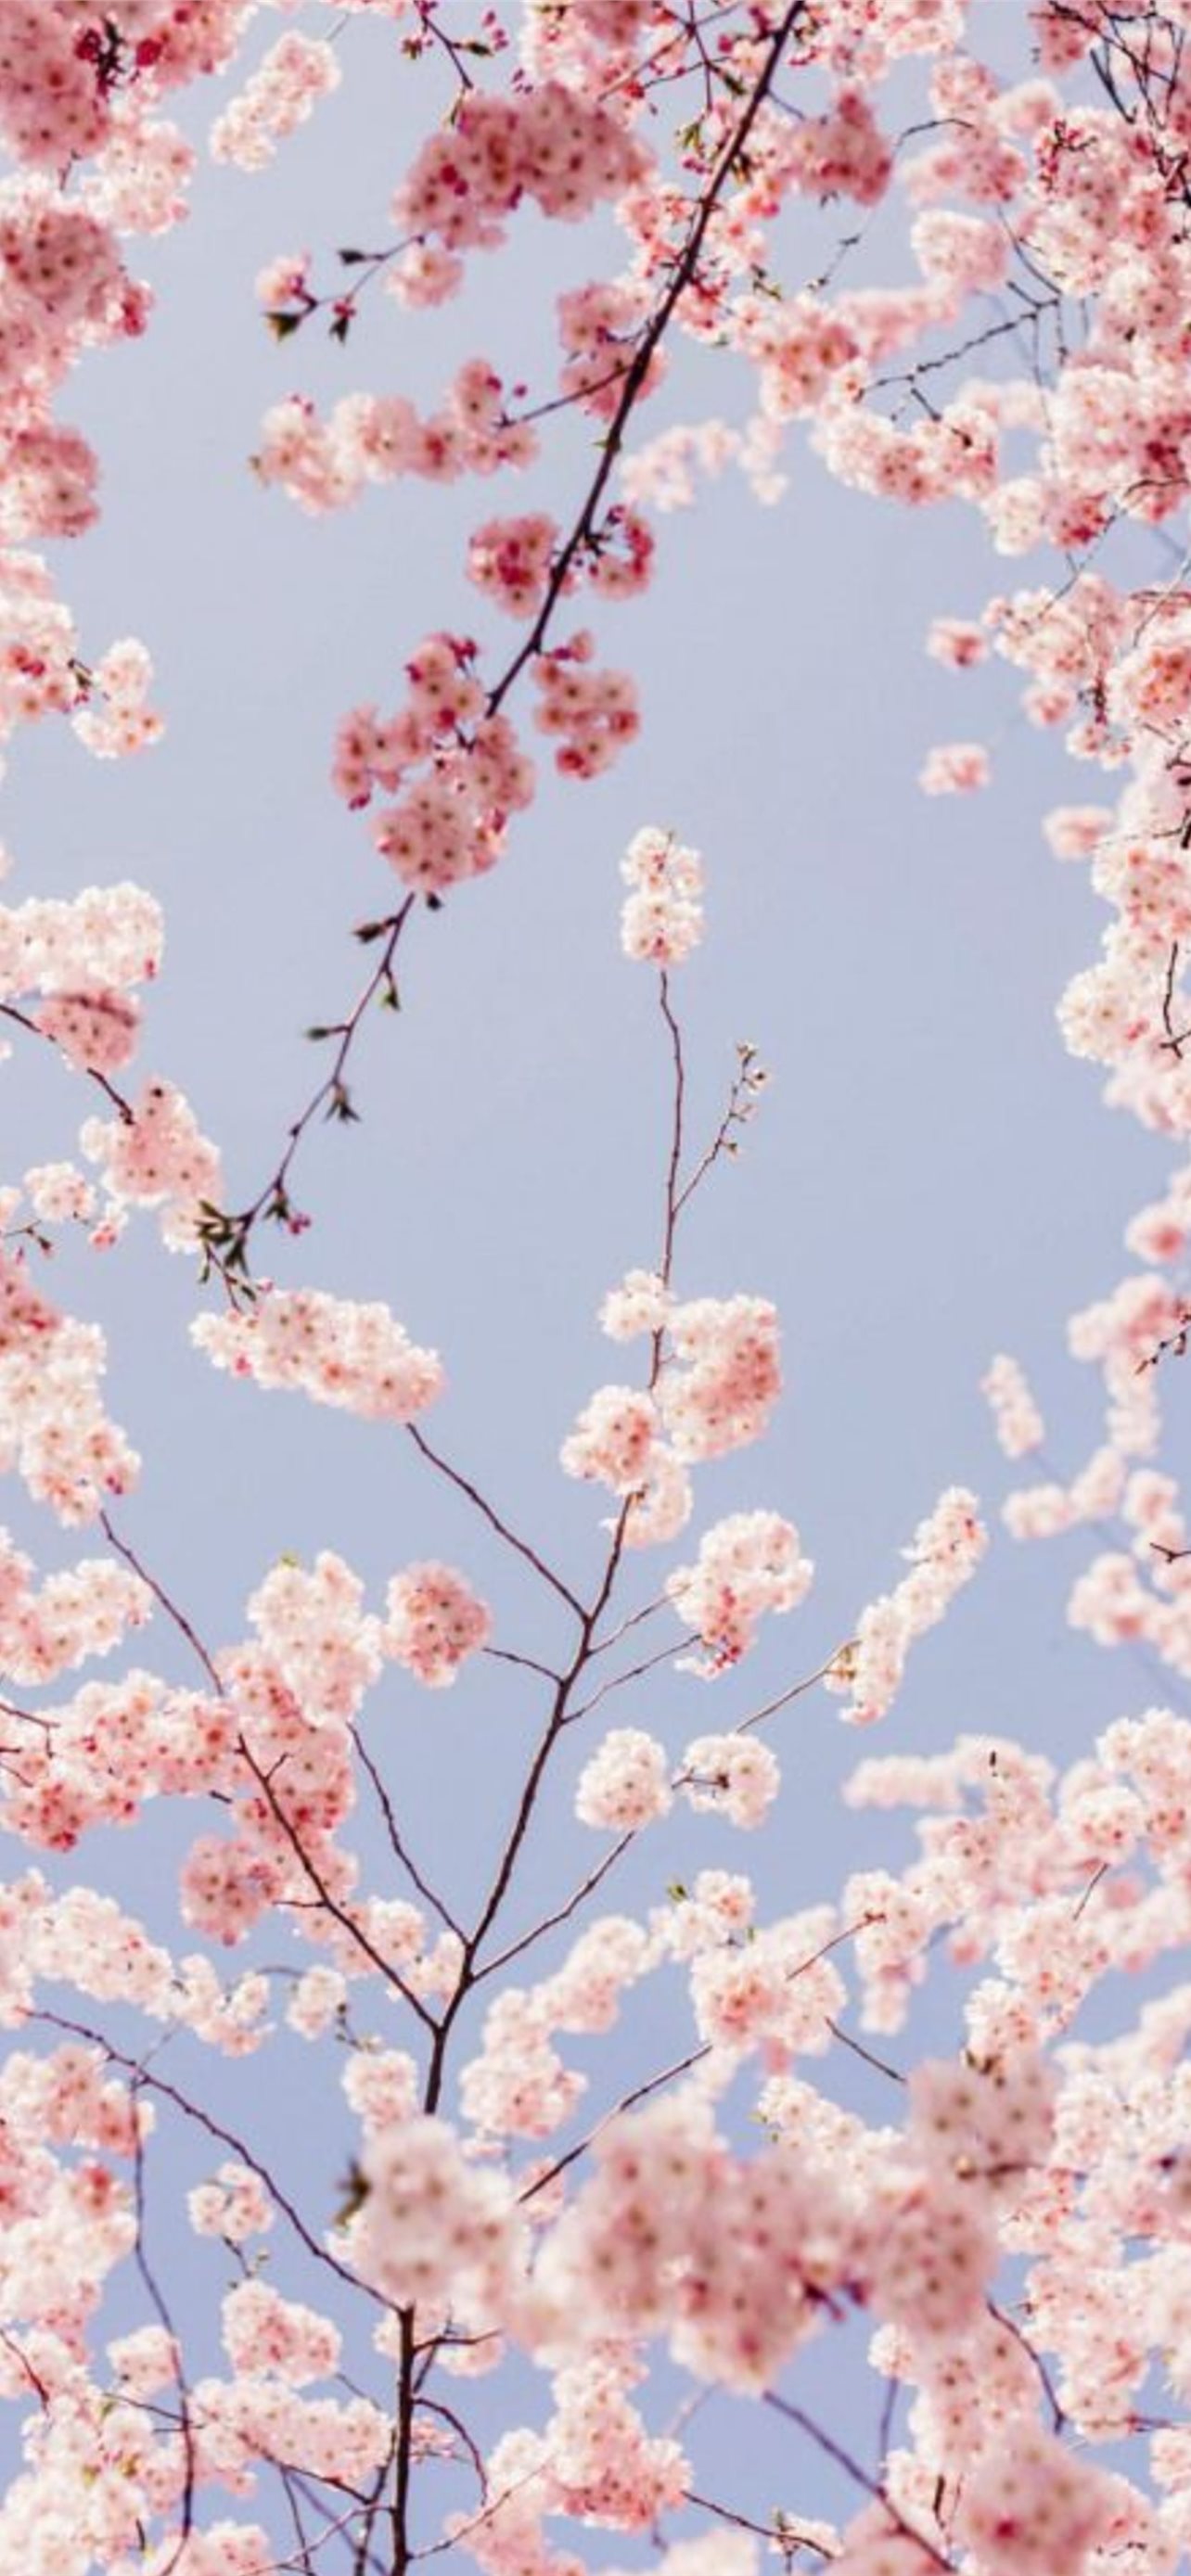 Romantic Spring Blossom Cherry Blossoms Beautiful Powerpoint Background For  Free Download - Slidesdocs